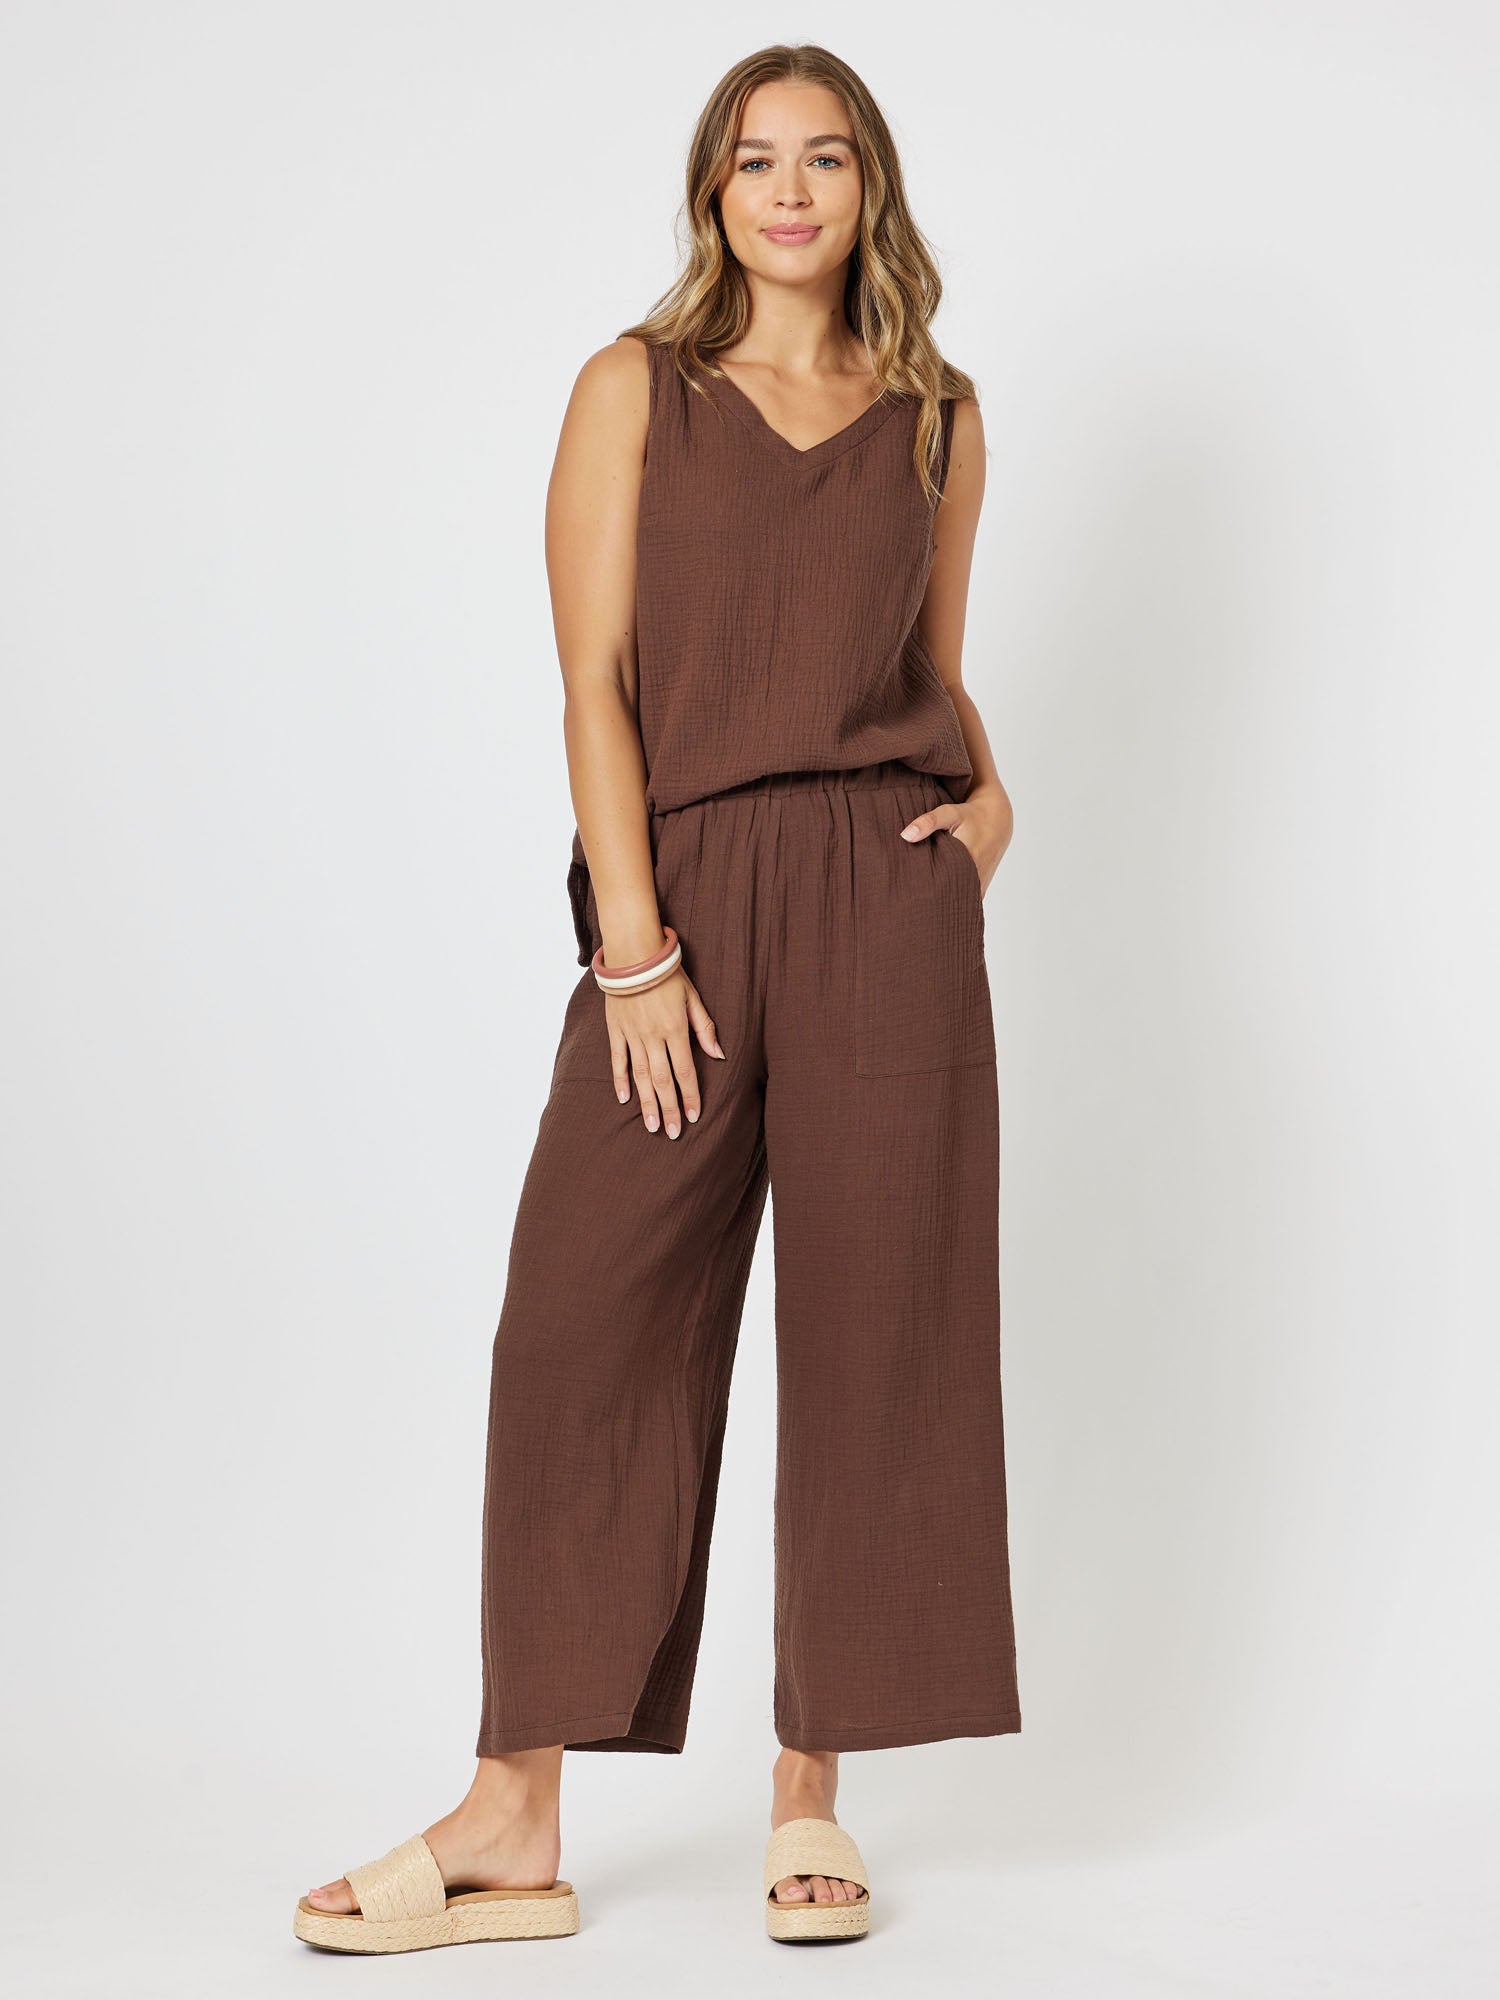 Byron Textured Cotton Wide Leg Pull On Pant - Chocolate